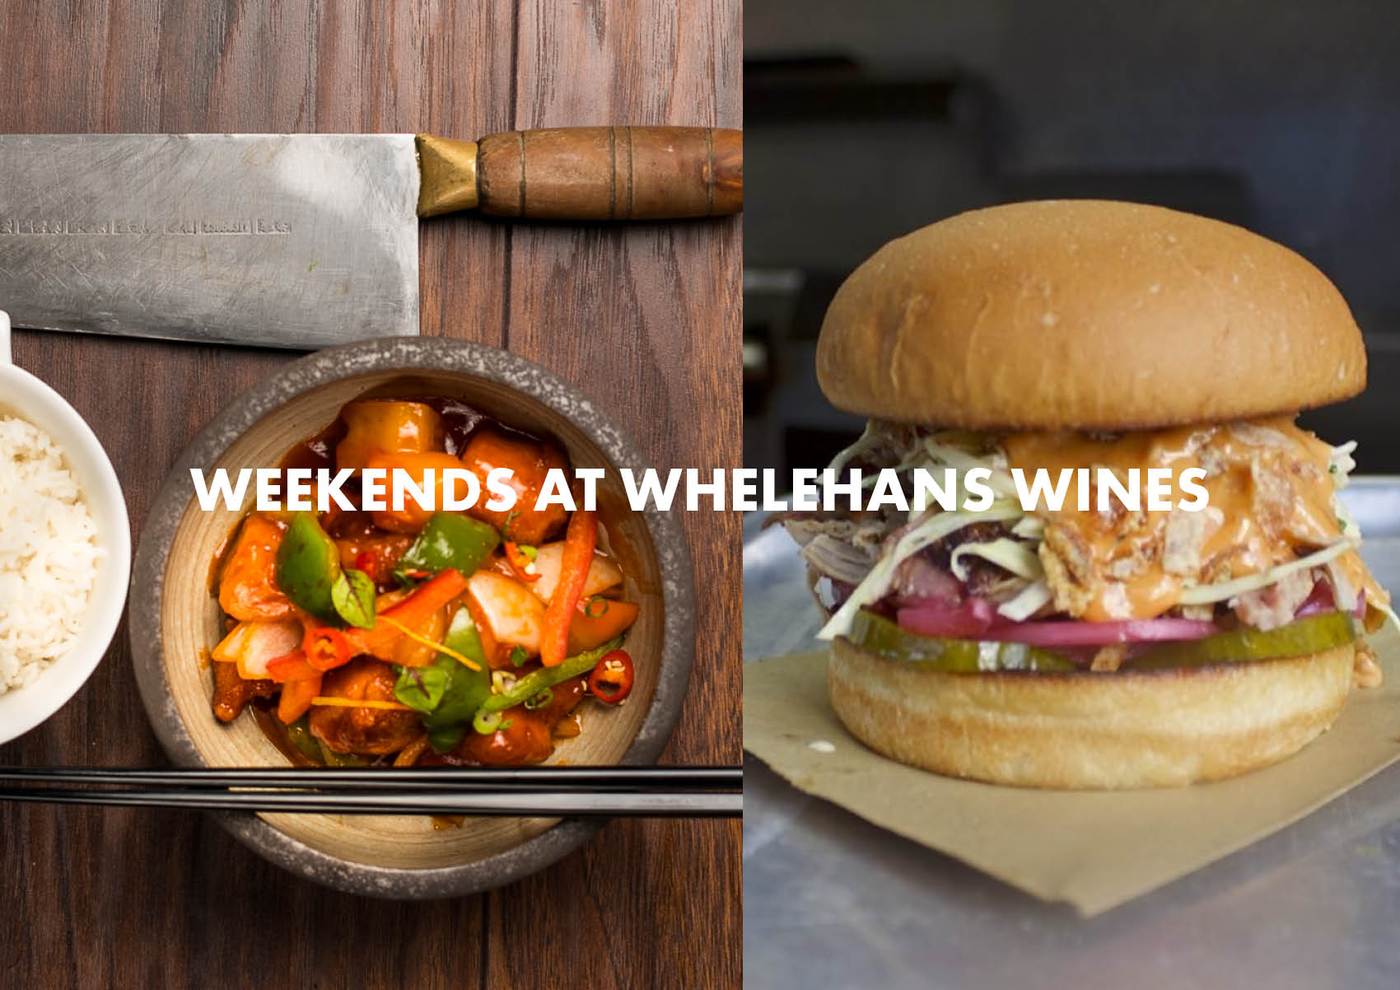 This Weekend at Whelehans Wines